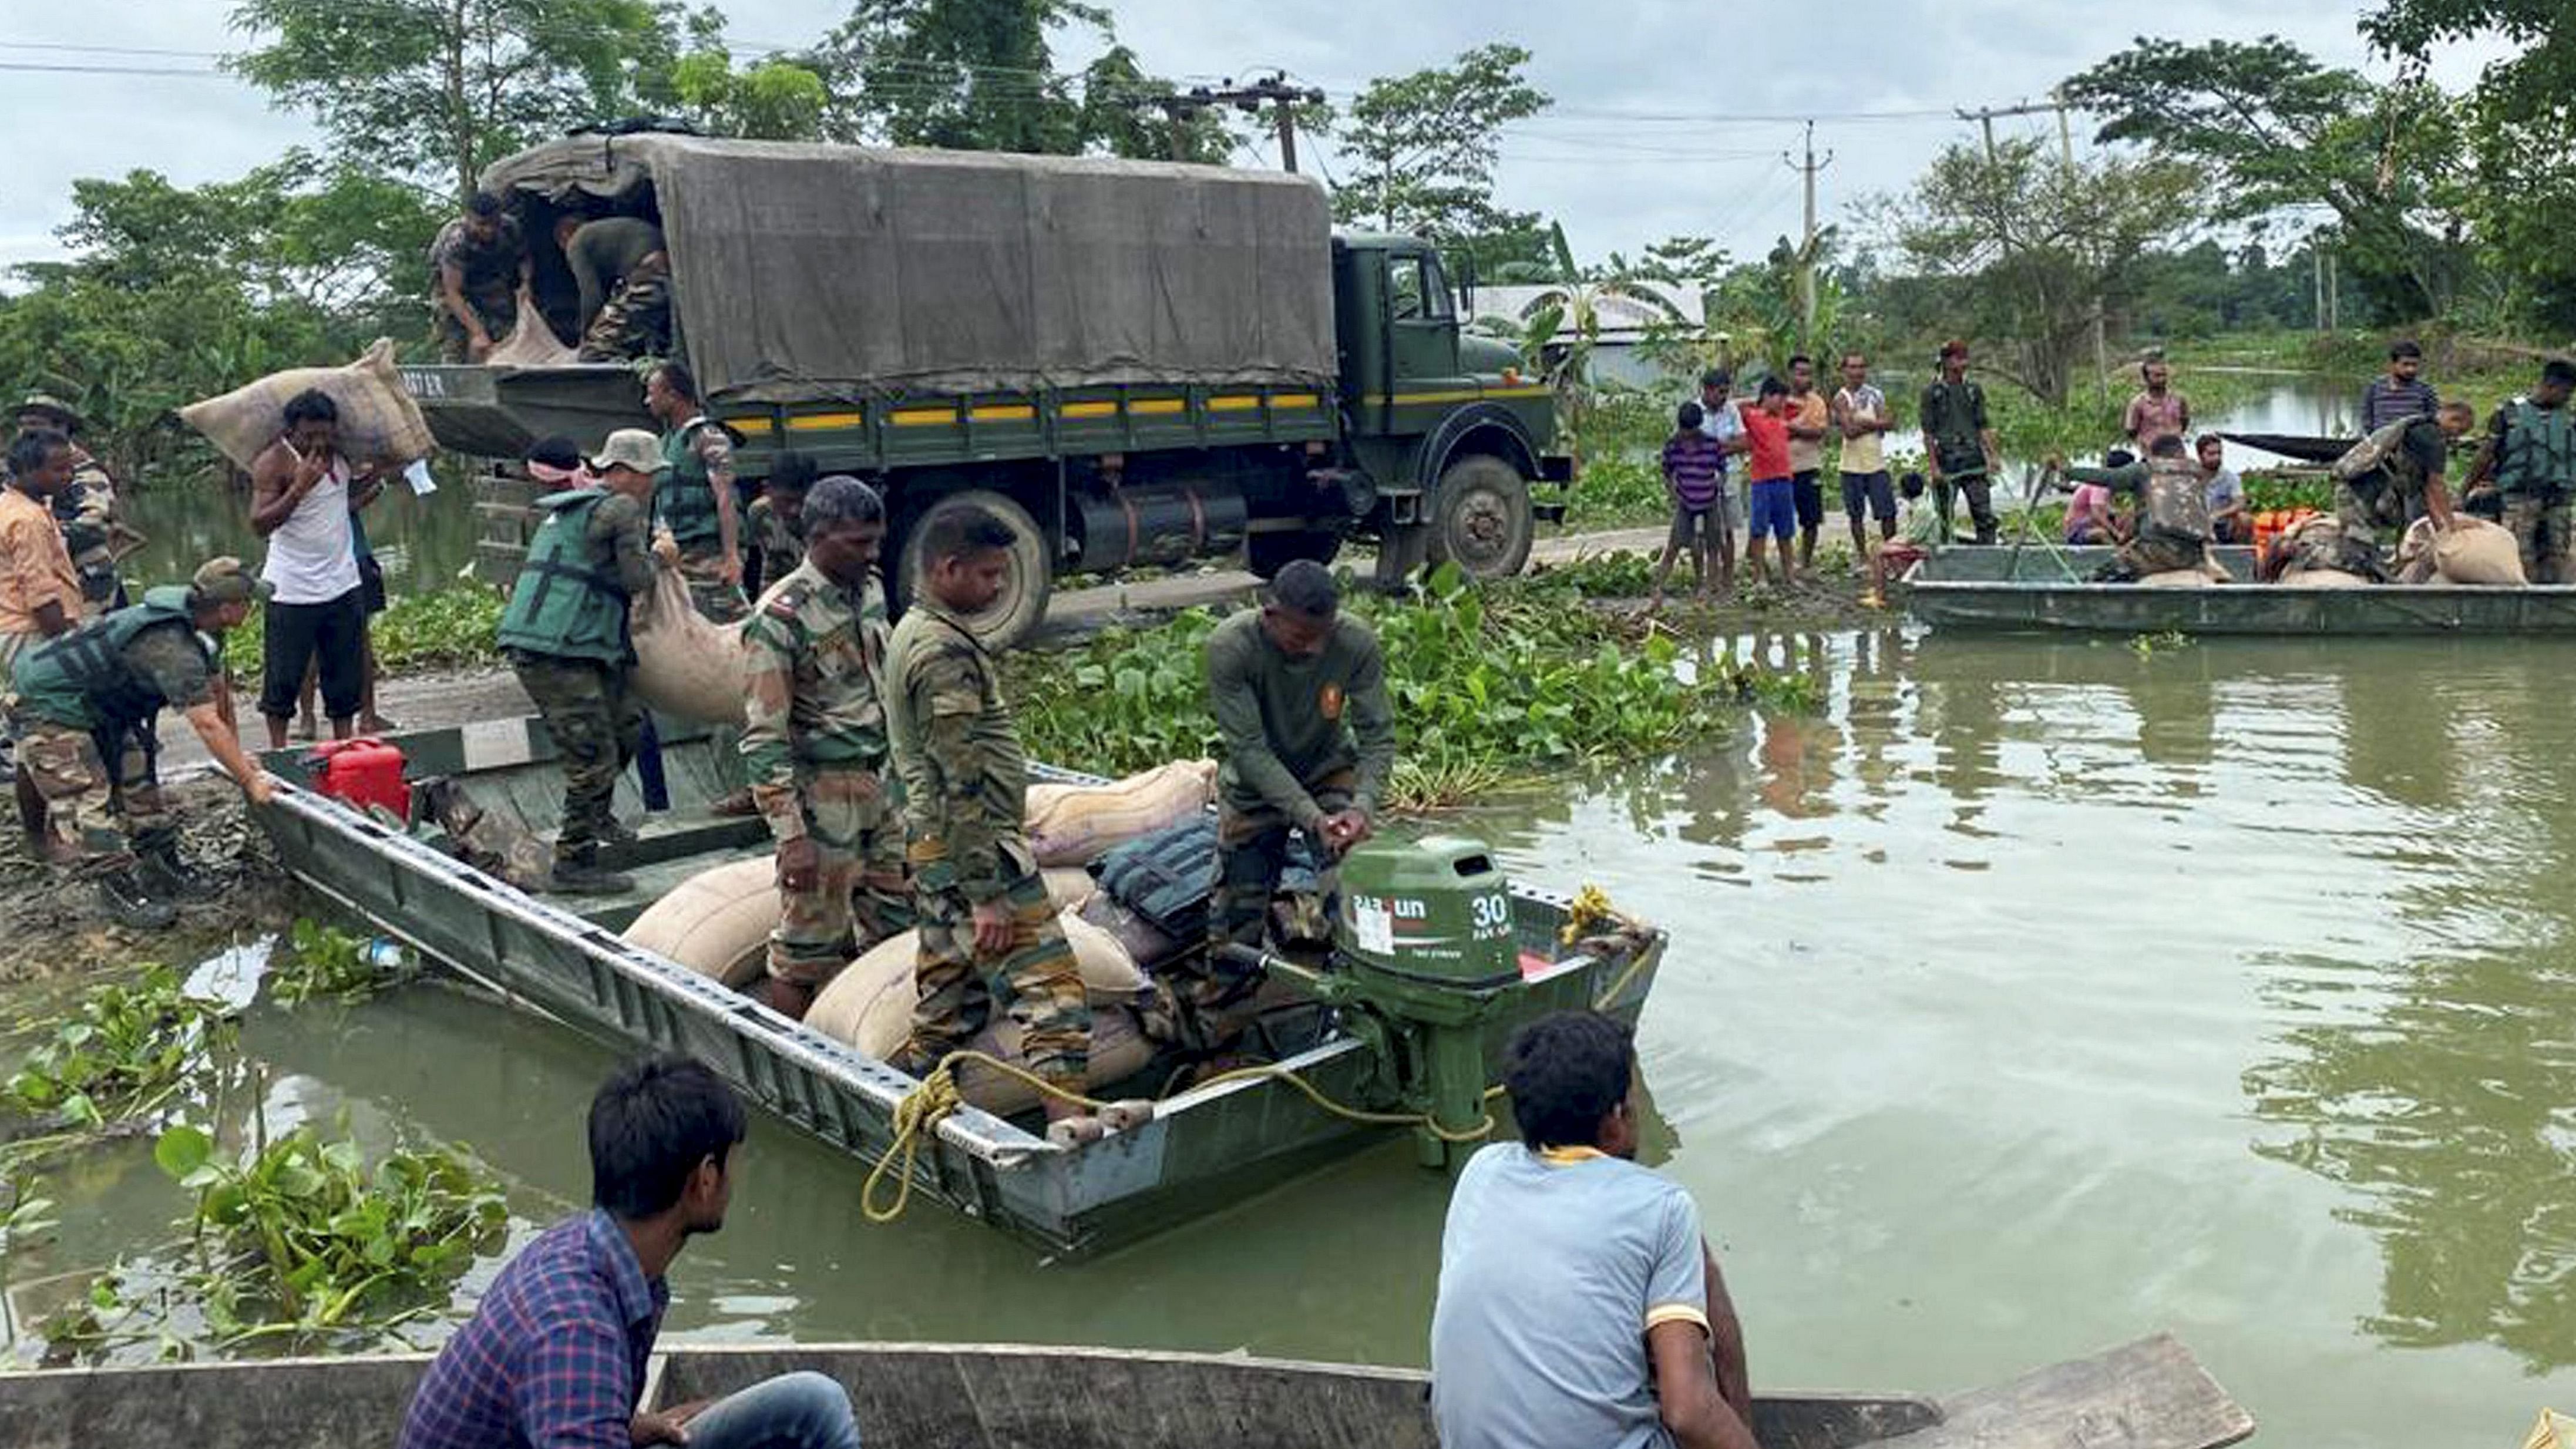 Indian Army's Assam Rifles personnel distribute relief material to residents of a flood-affected area, in Silchar. Credit: PTI Photo